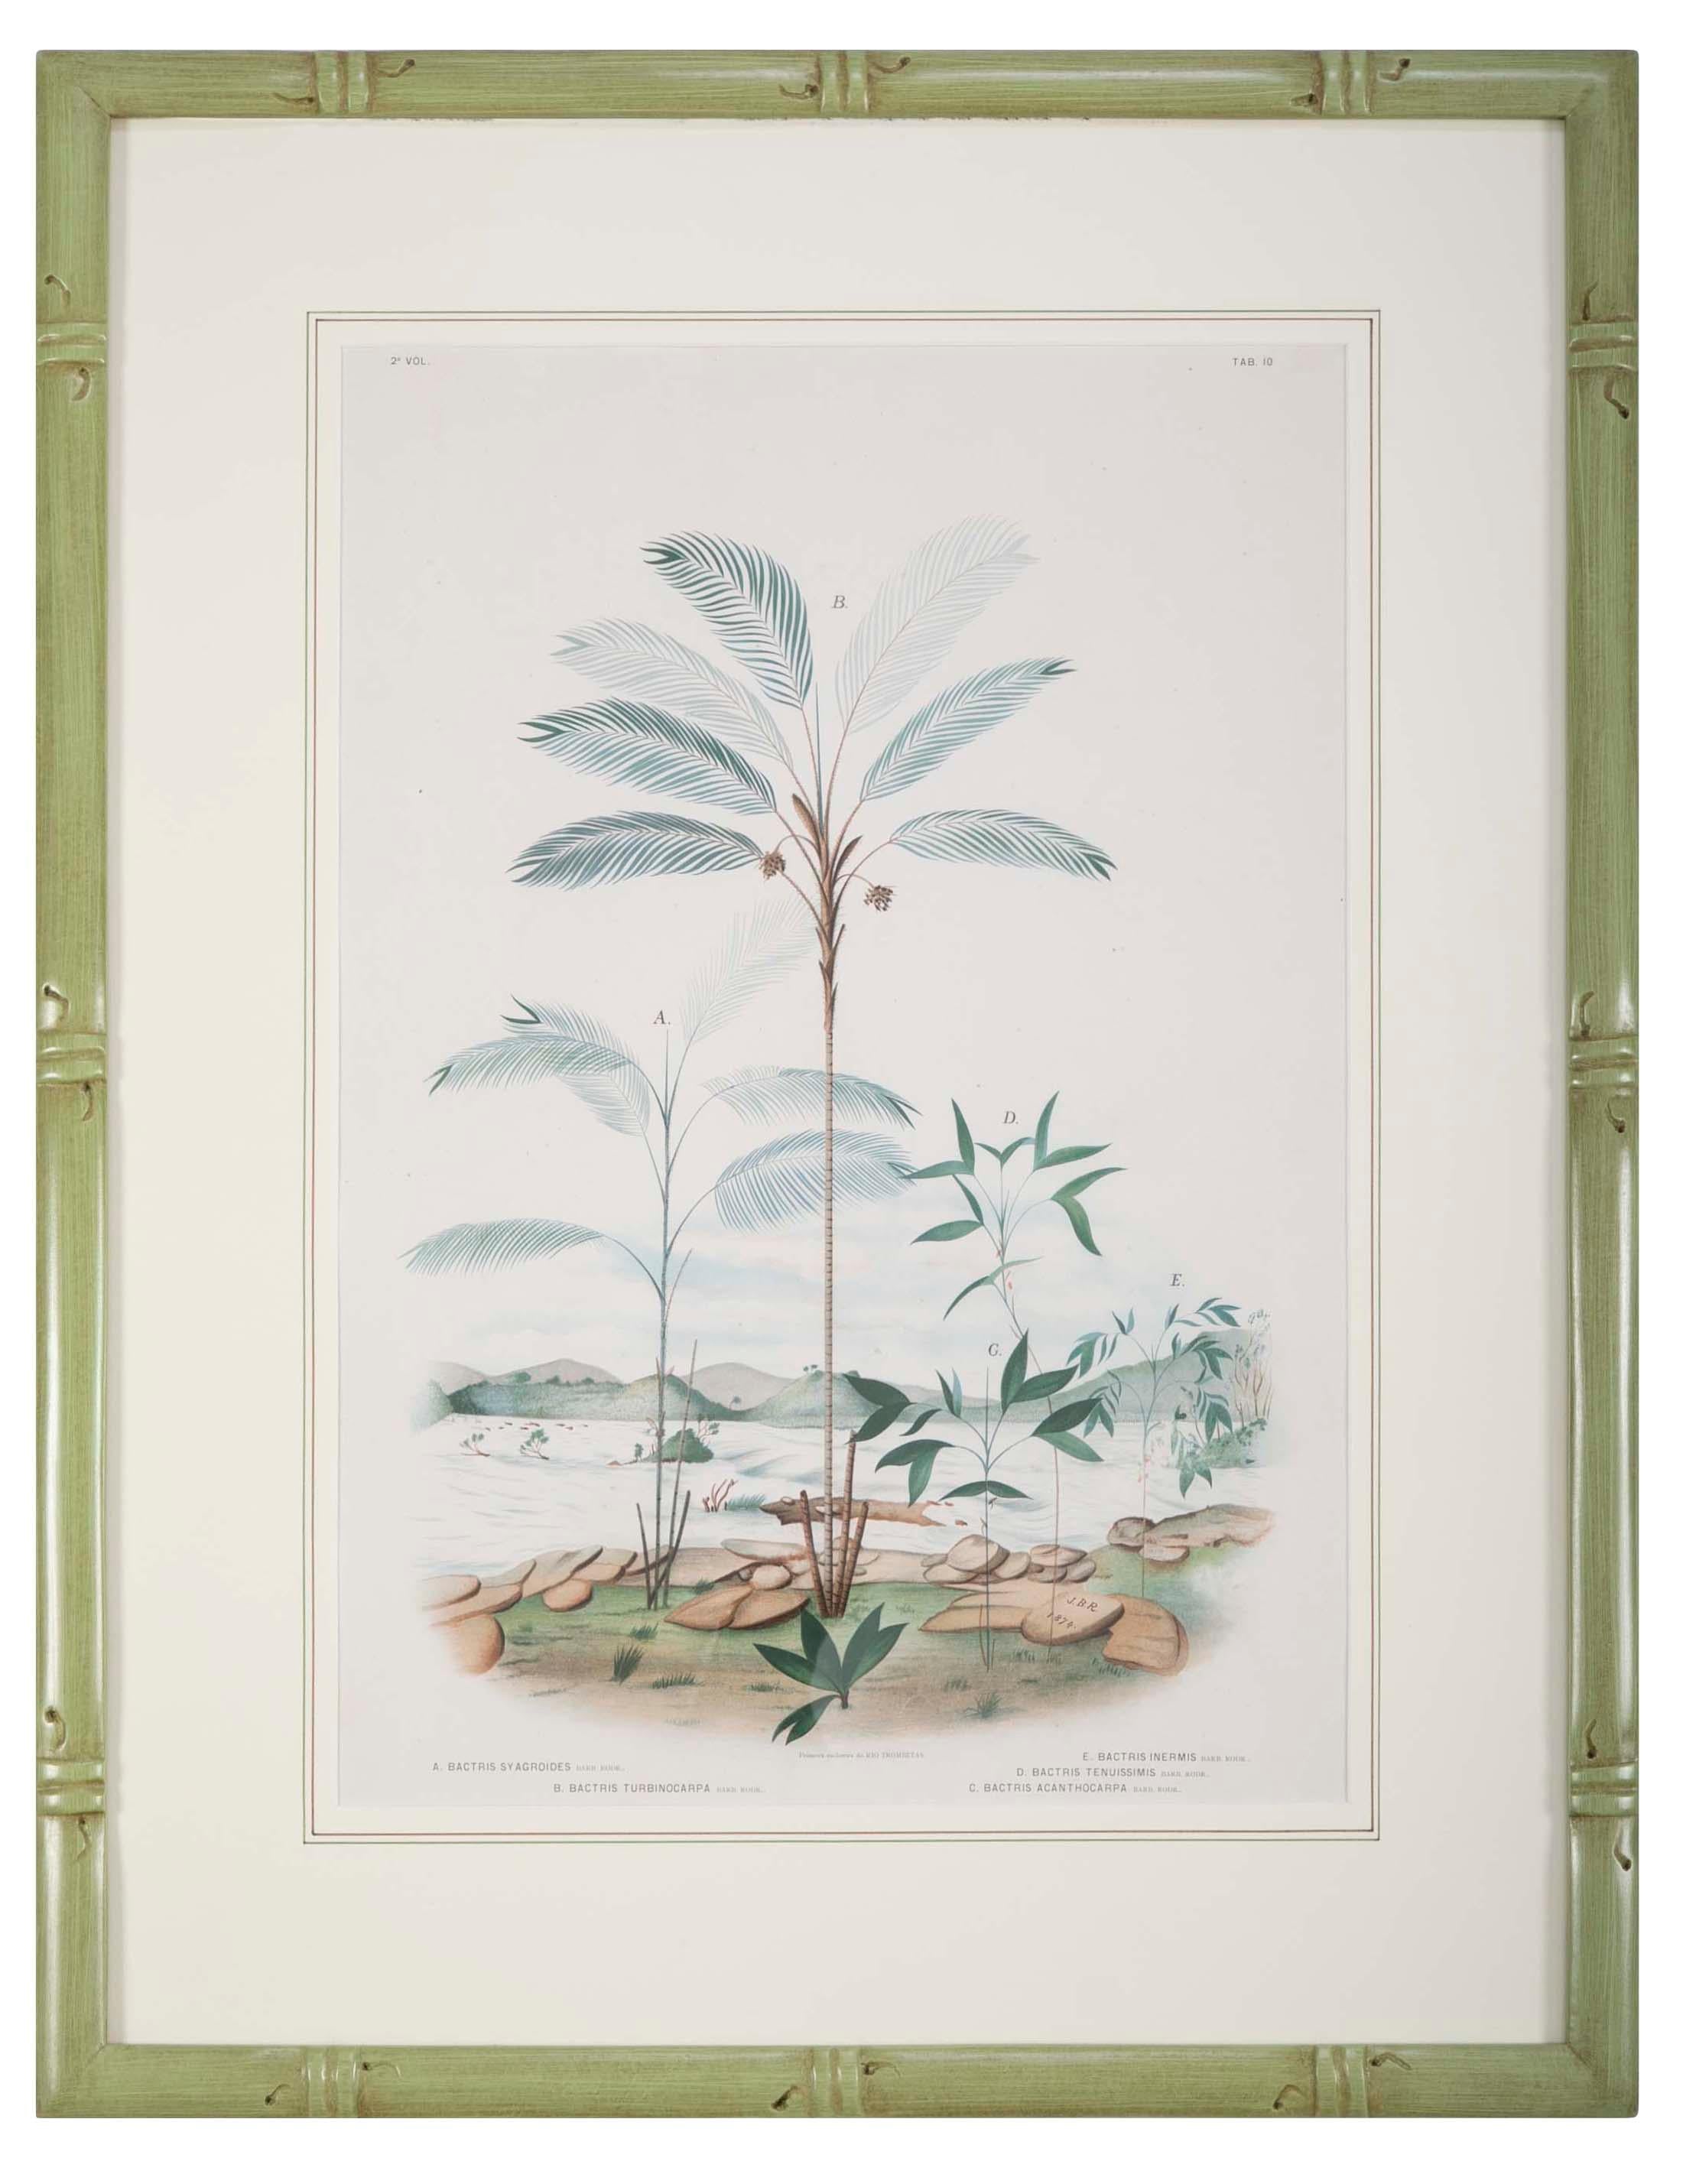 A set of four chromolithographs of Brazilian palms and natives with palms by Joao Barbosa Rodrigues.
Handmade unique frames with gold fillet.

Can be sold separately for $ 2,500 each.